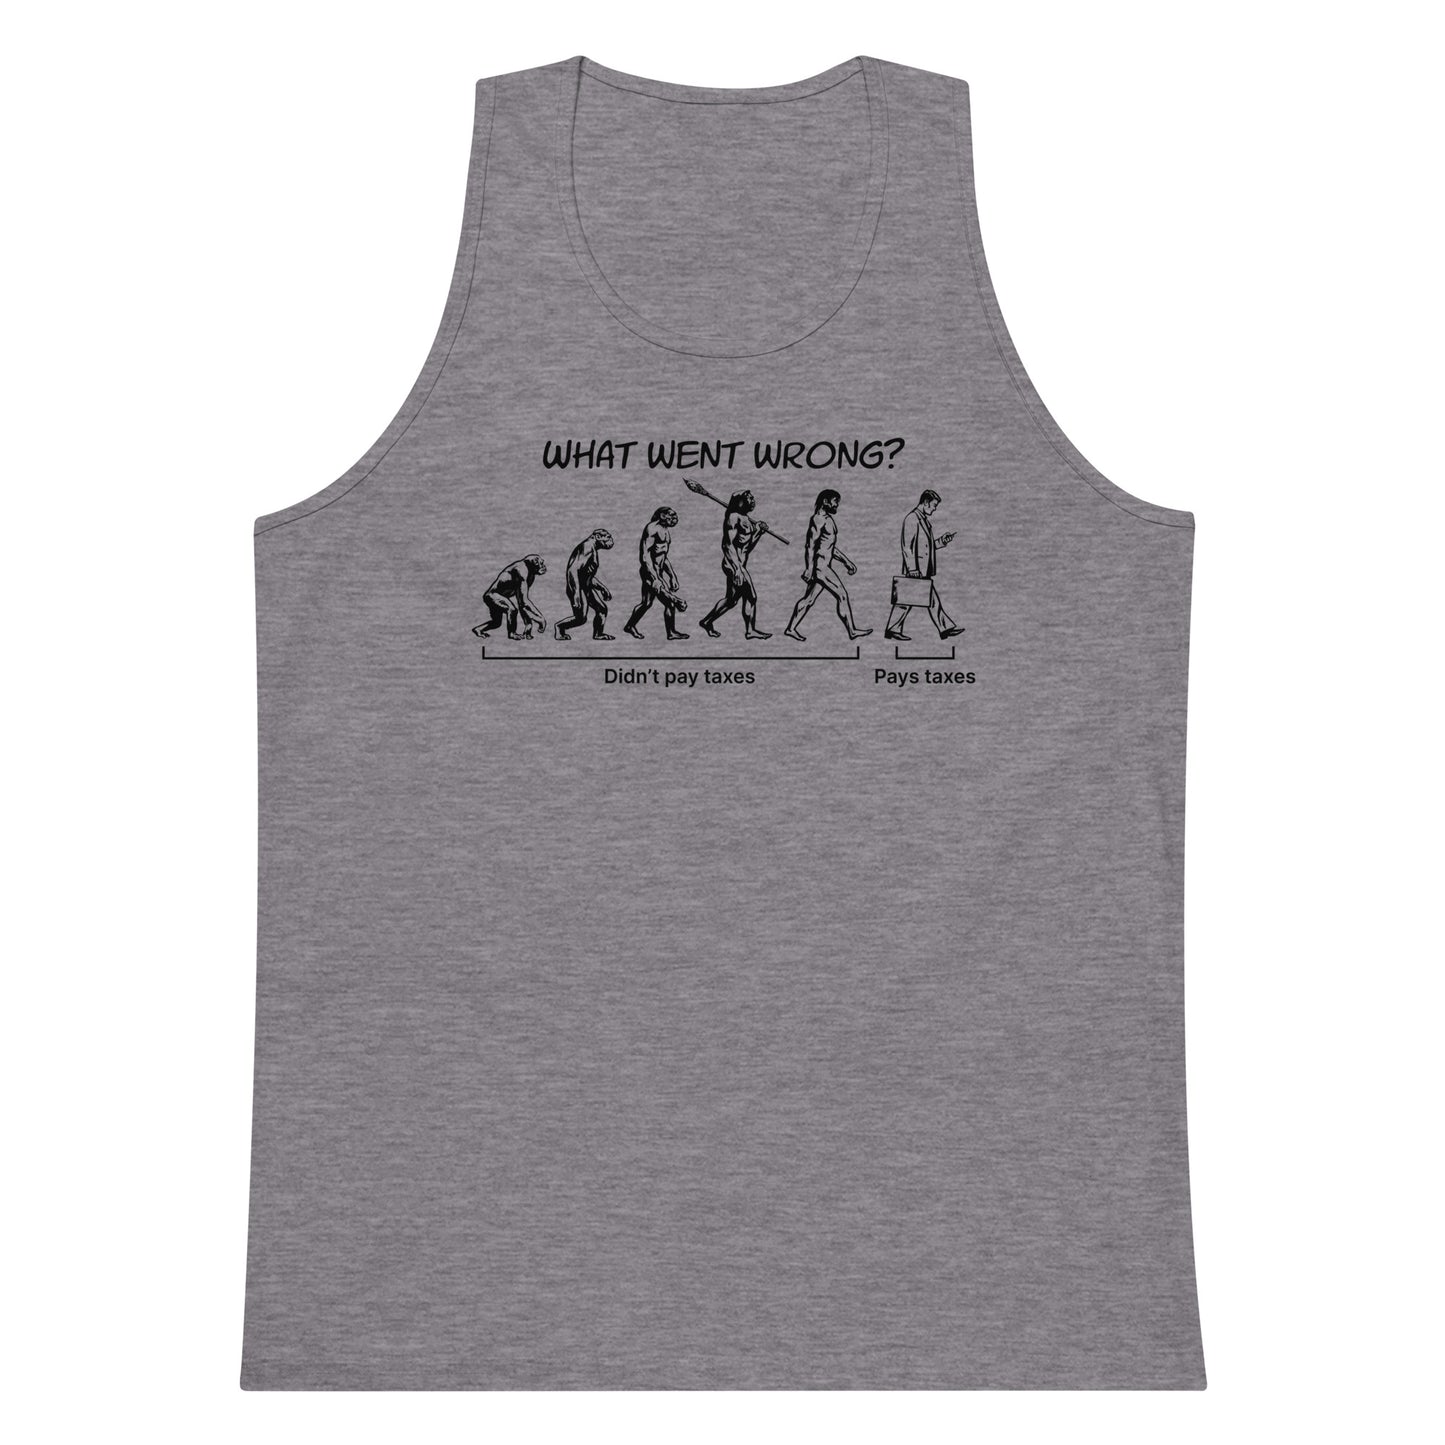 What Went Wrong (Taxes) tank top